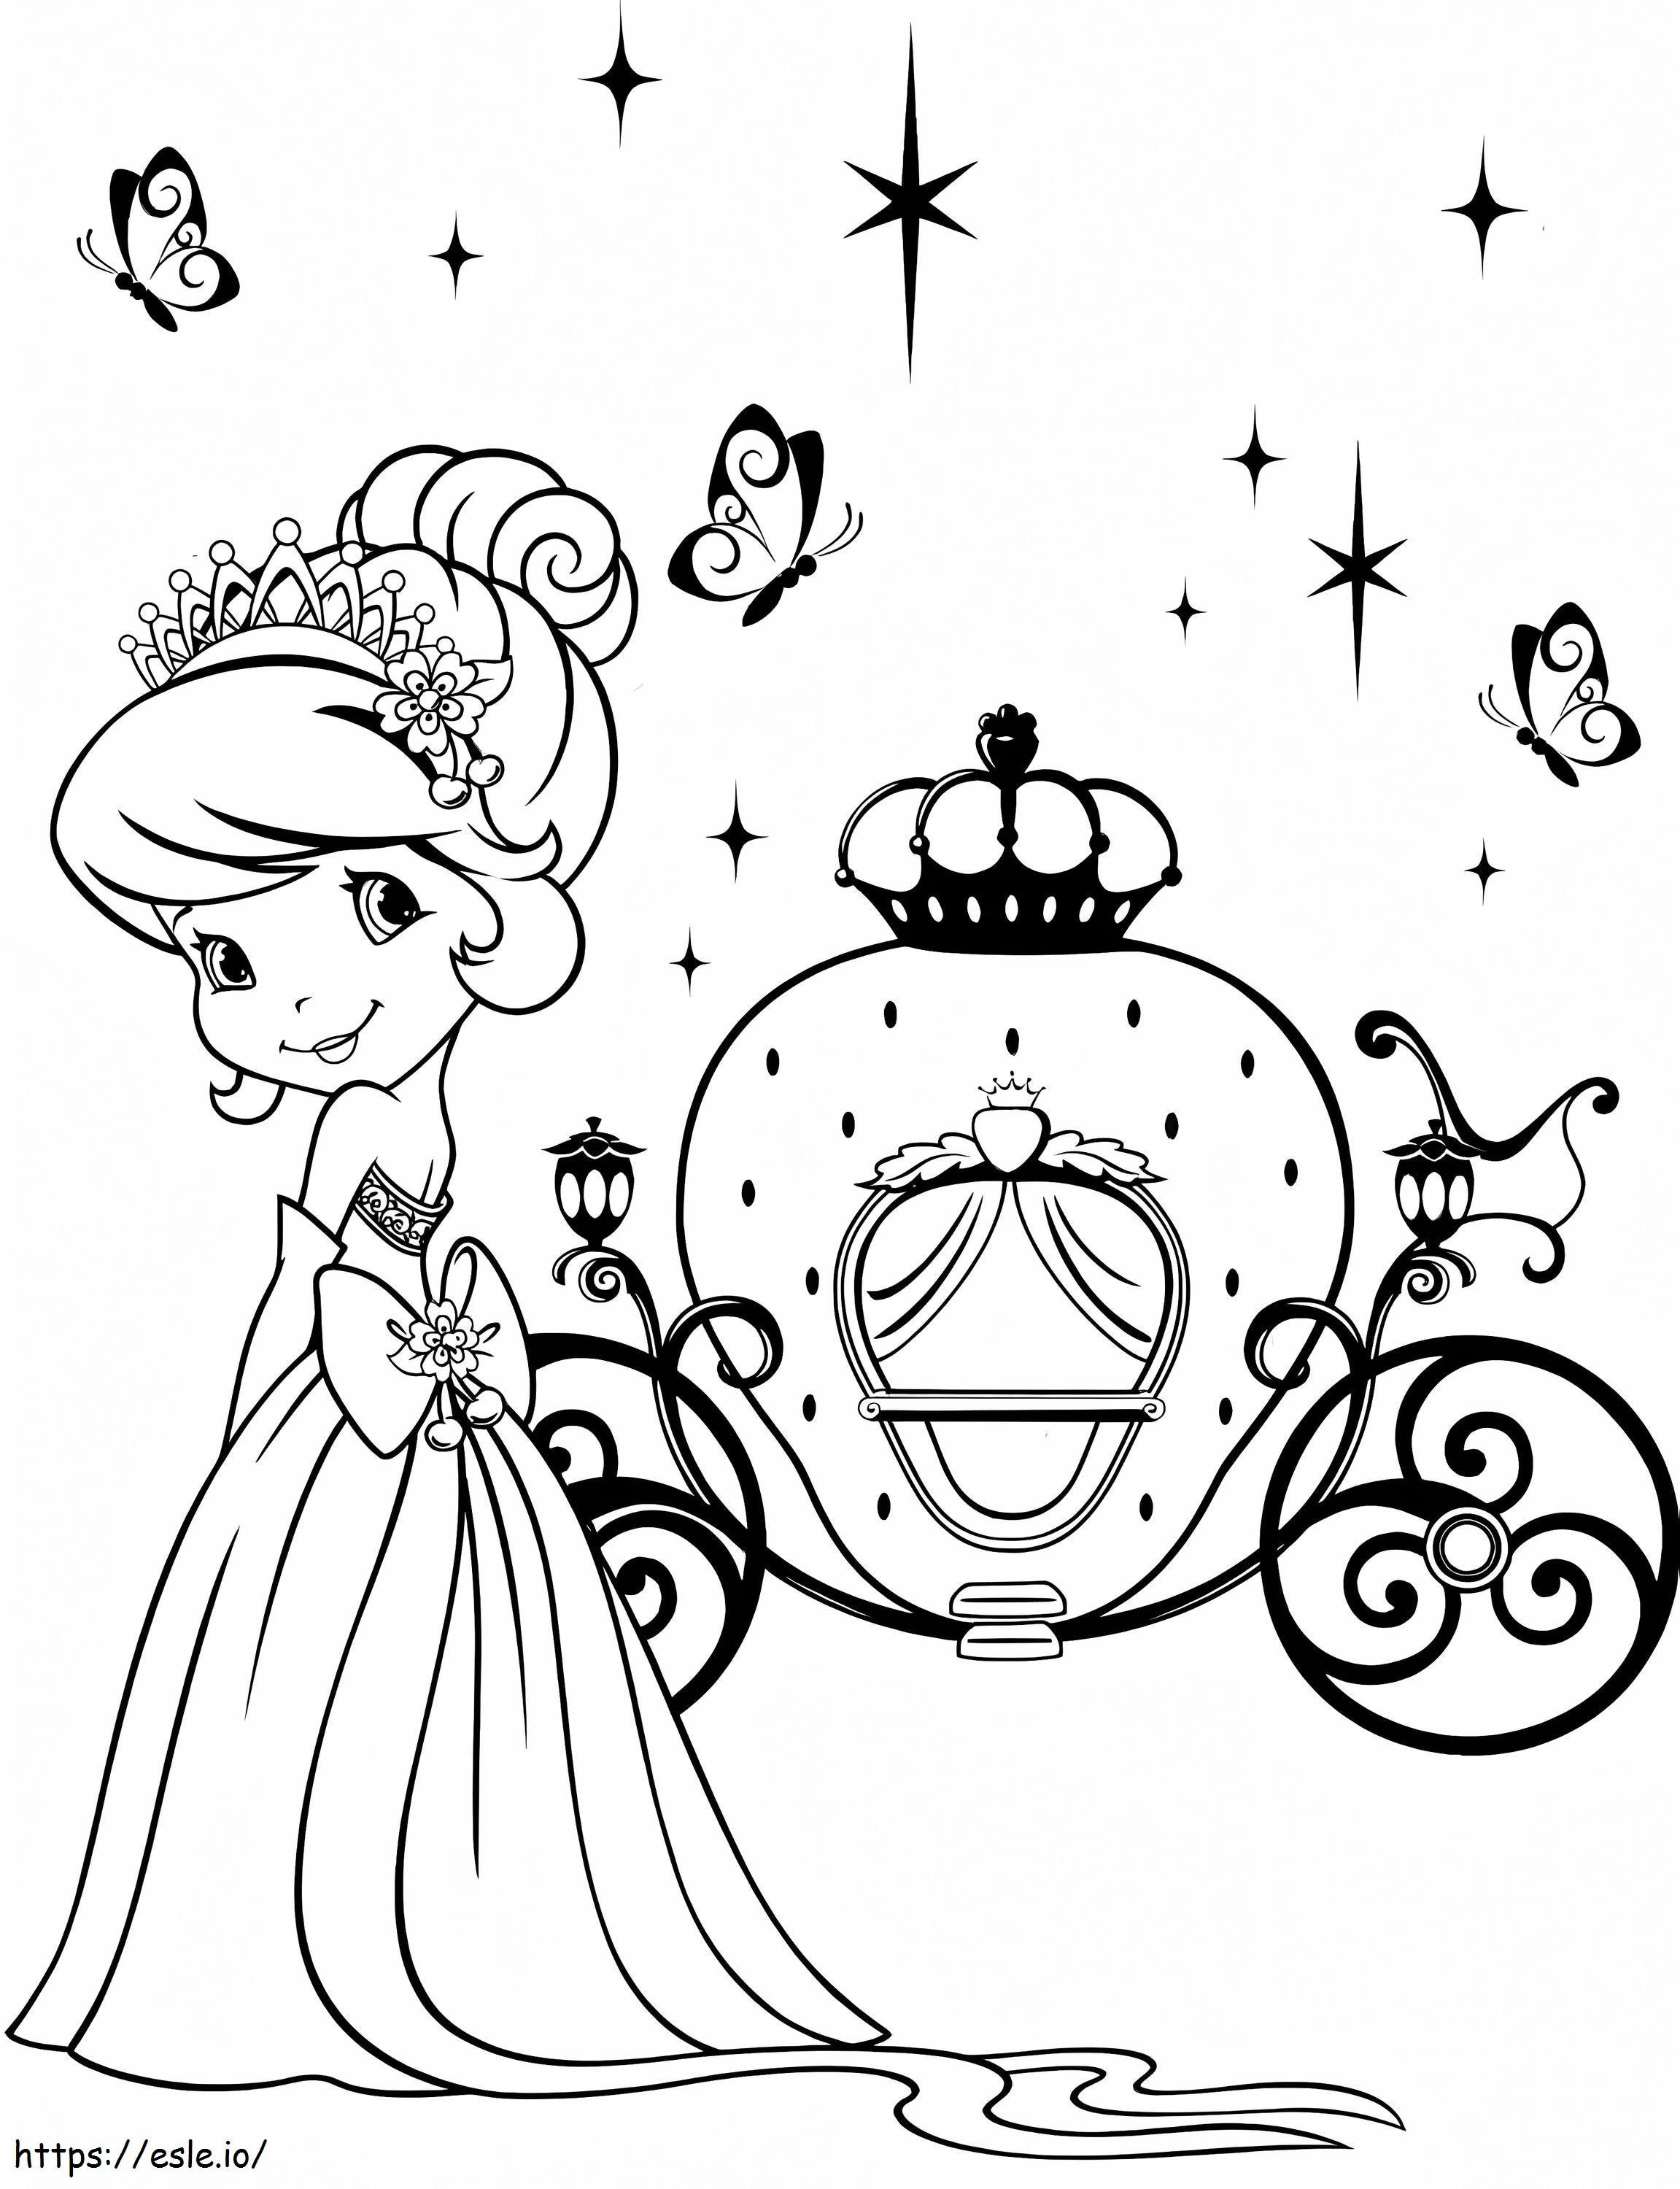 Strawberry Shortcake And Magical Carriage coloring page